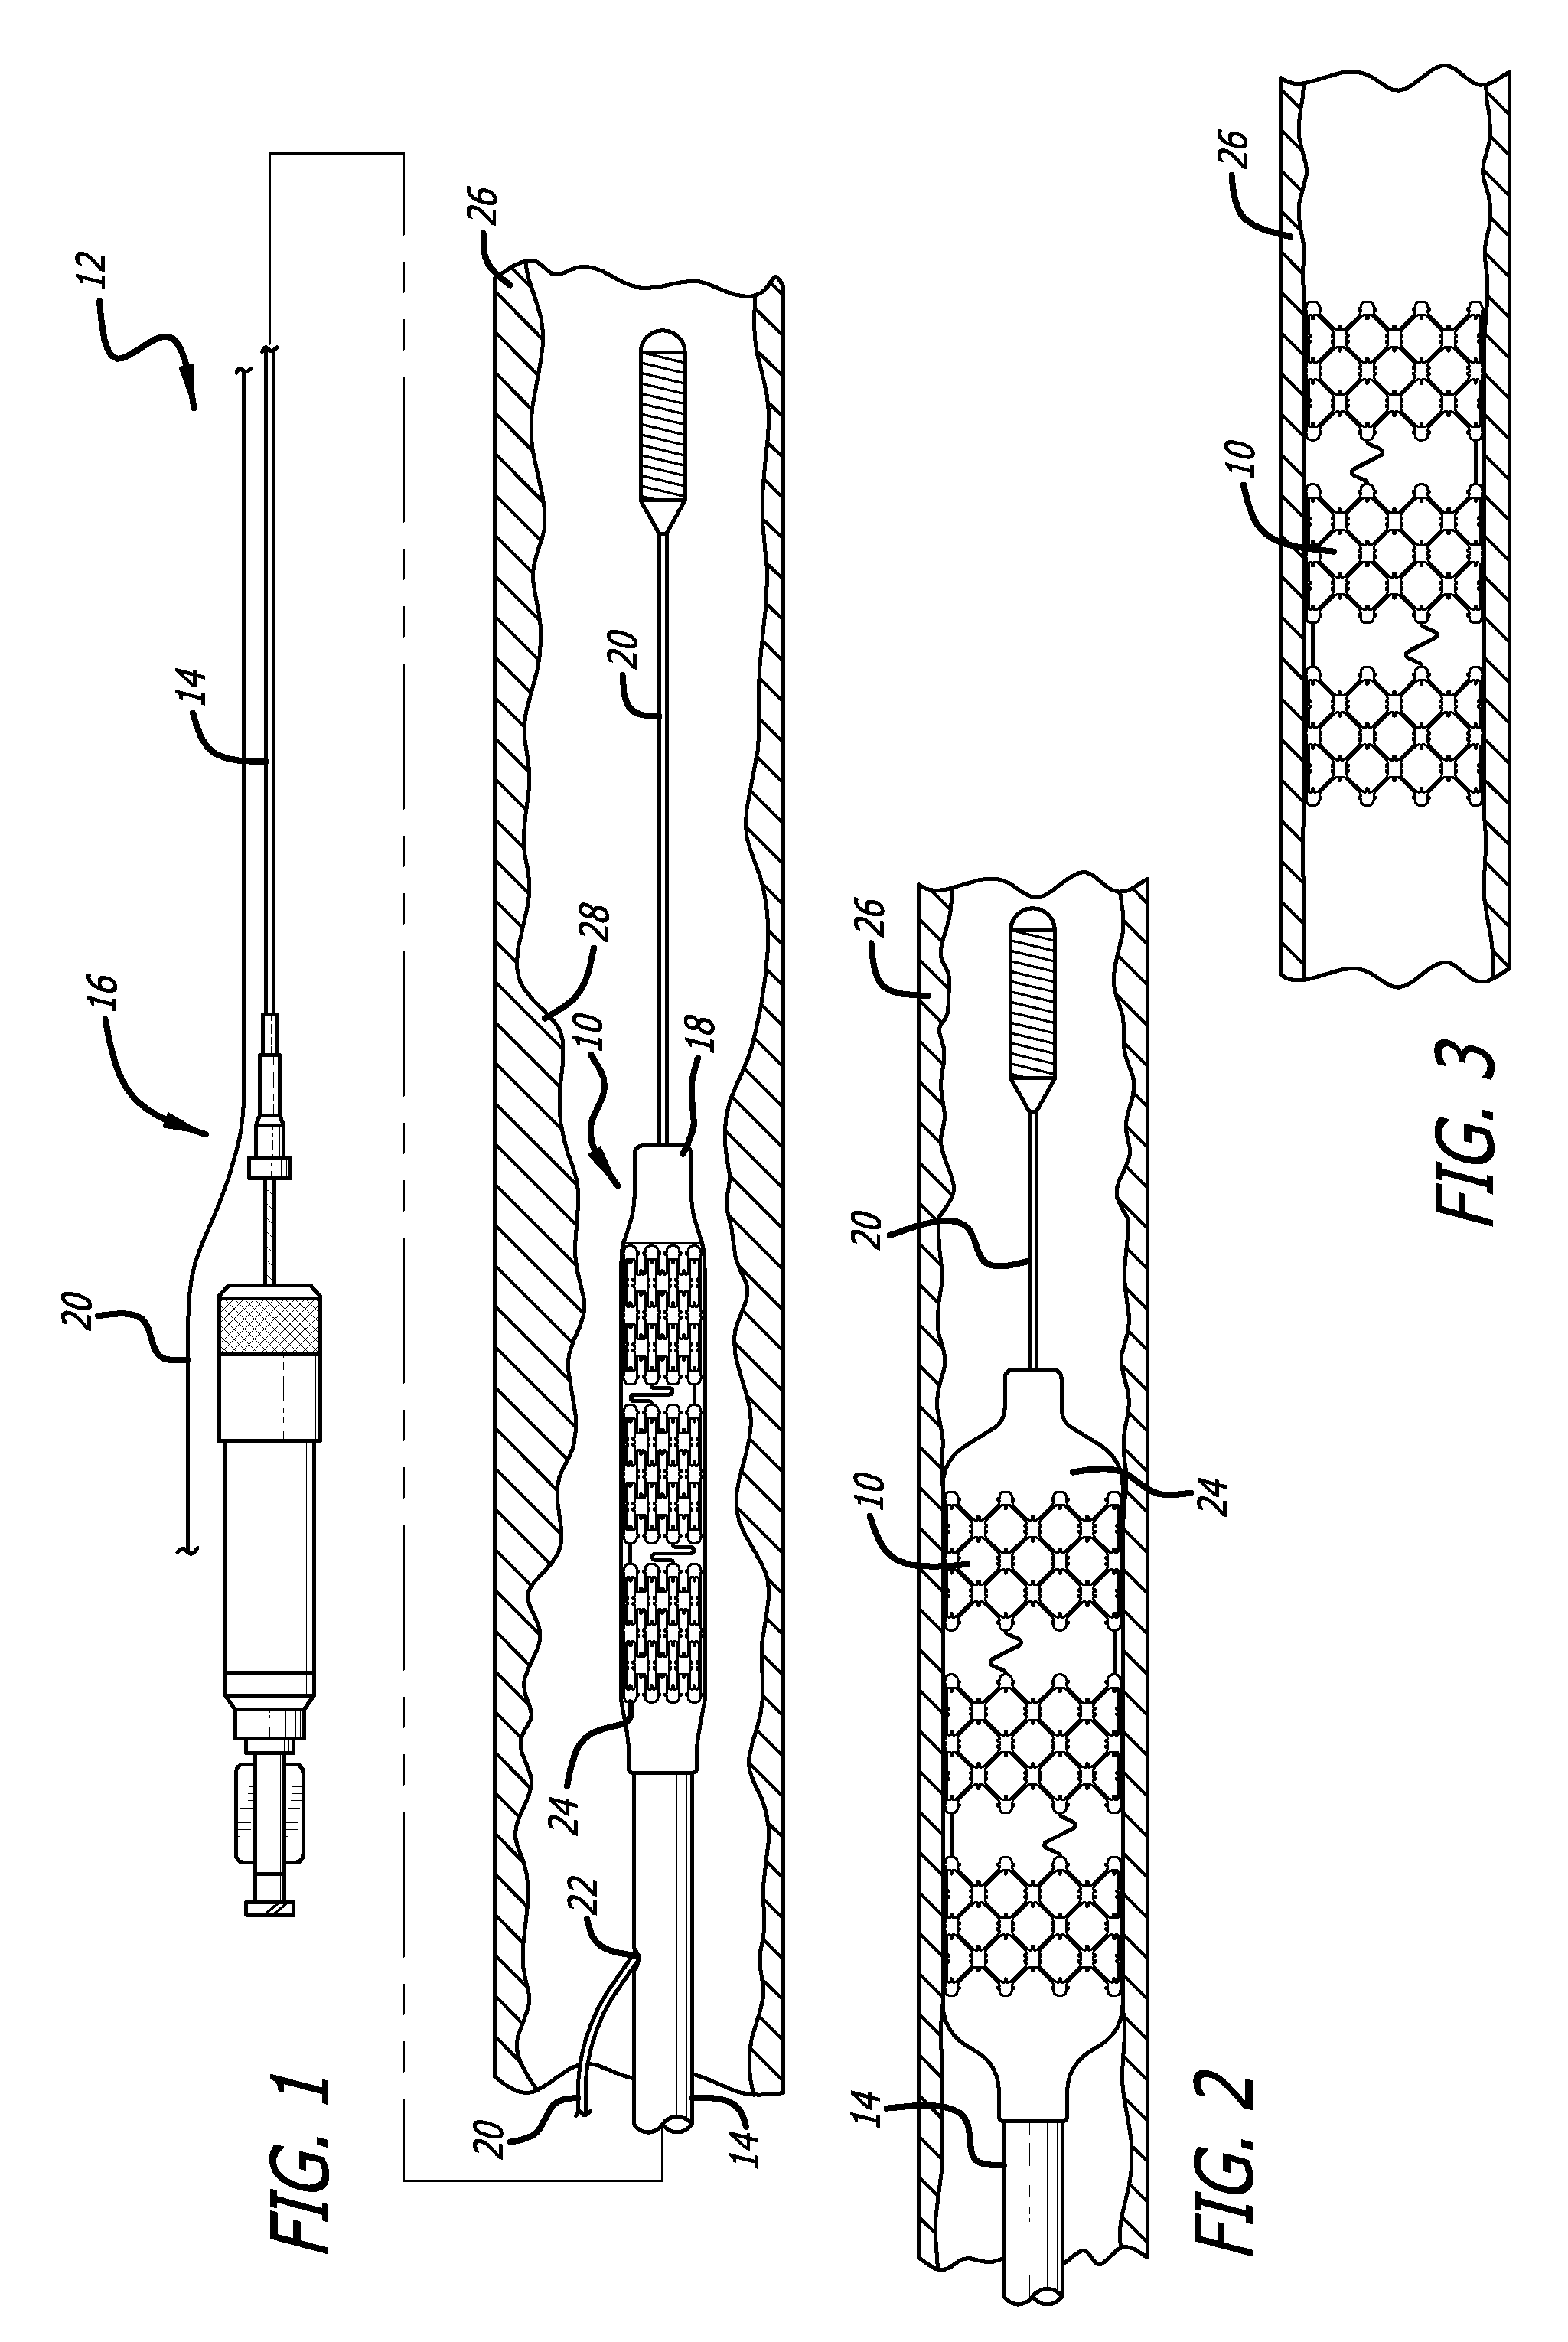 Endoprostheses with strut pattern having multiple stress relievers